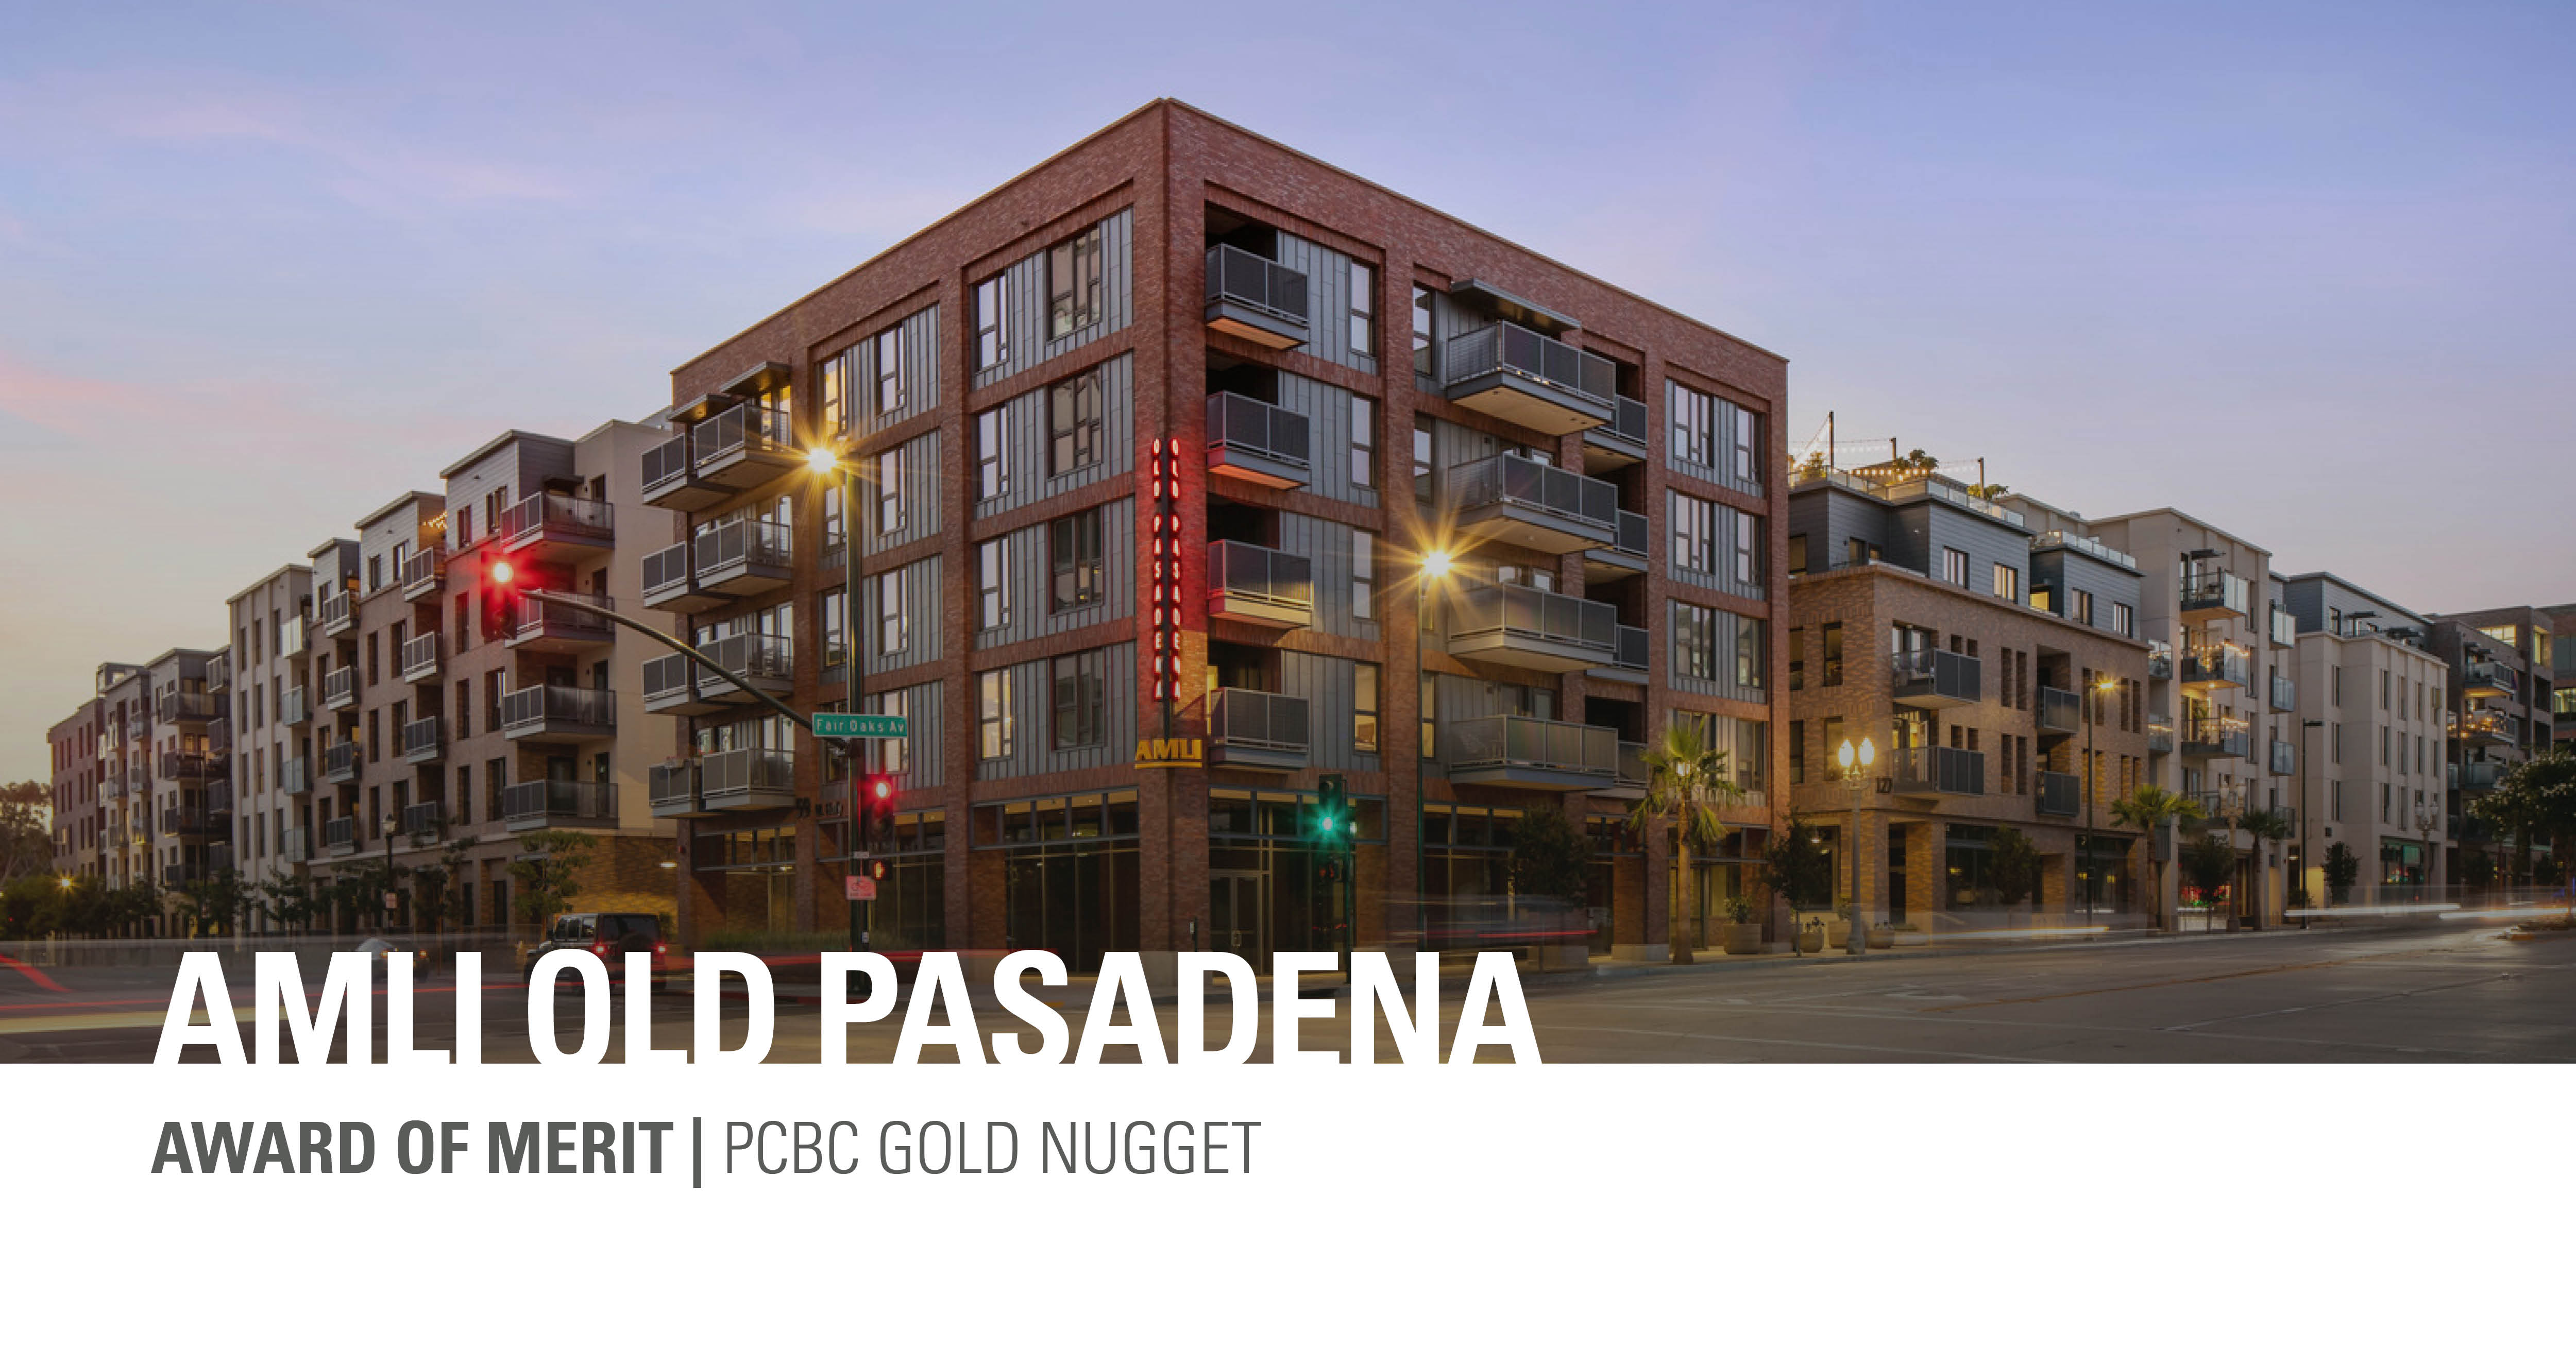 /Exterior%20of%20AMLI%20Old%20Pasadena%20from%20street%2C%20with%20text%20saying%20Award%20of%20Merit%20%7C%20PCBC%20Gold%20Nugget